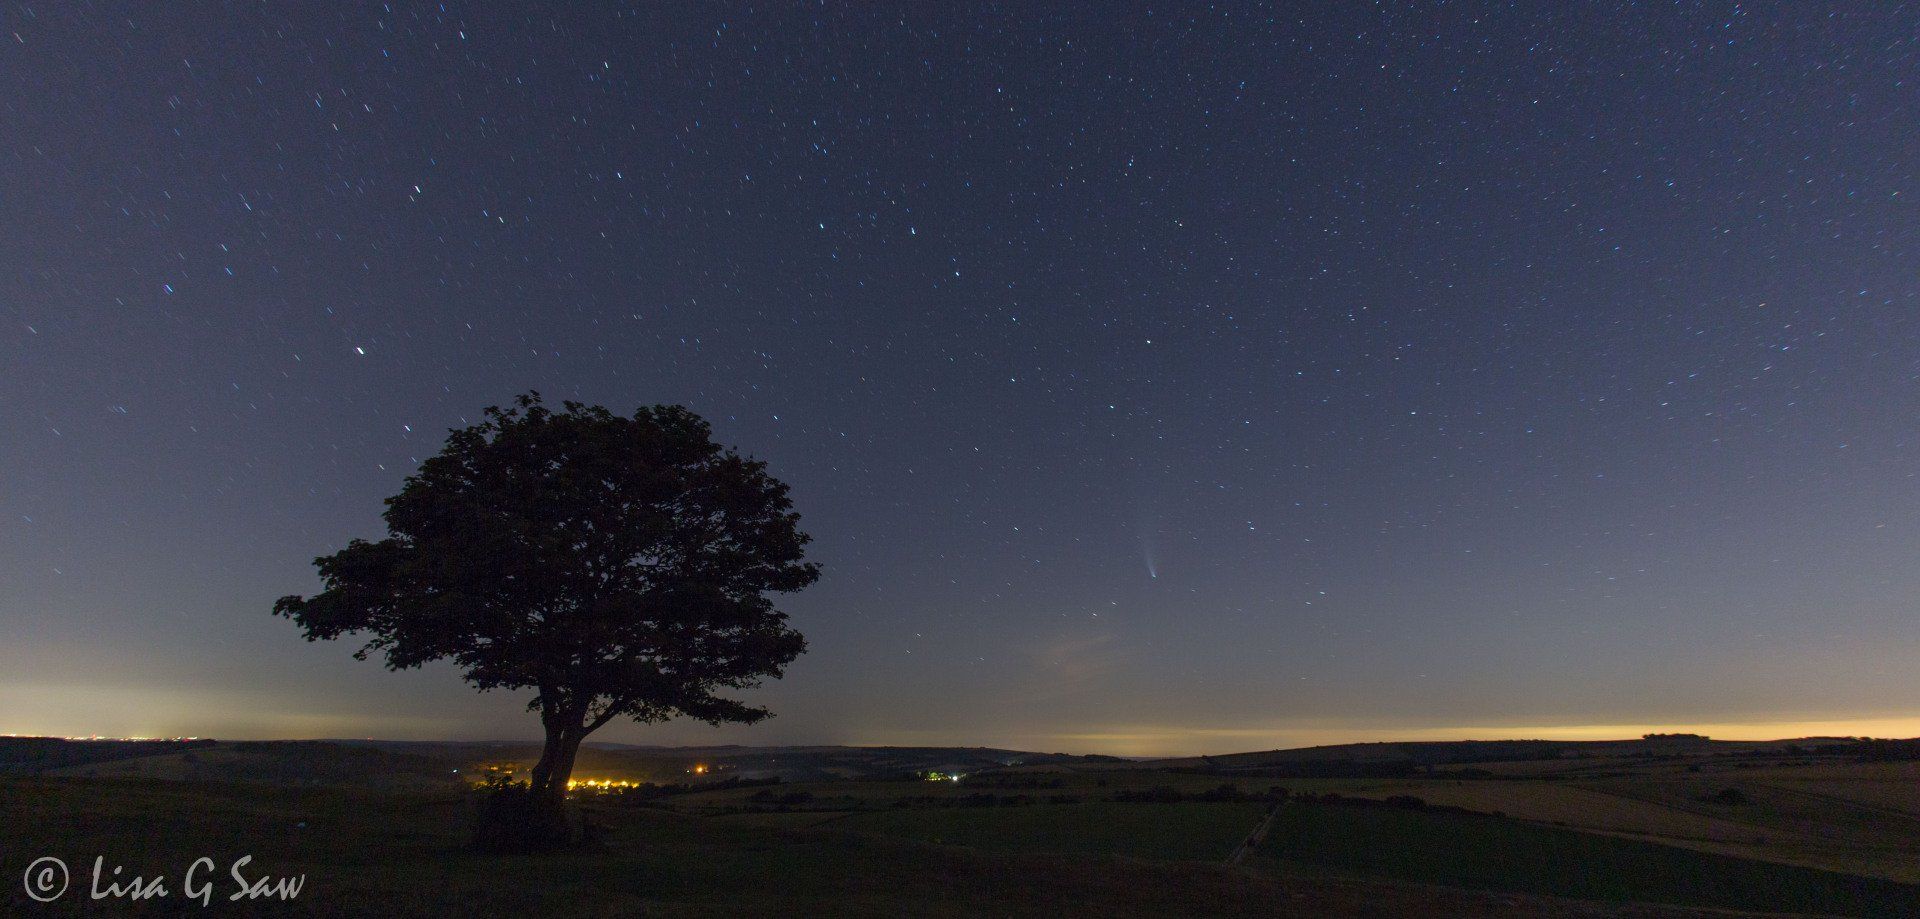 The lone tree at Cissbury with Neowise Comet in night sky